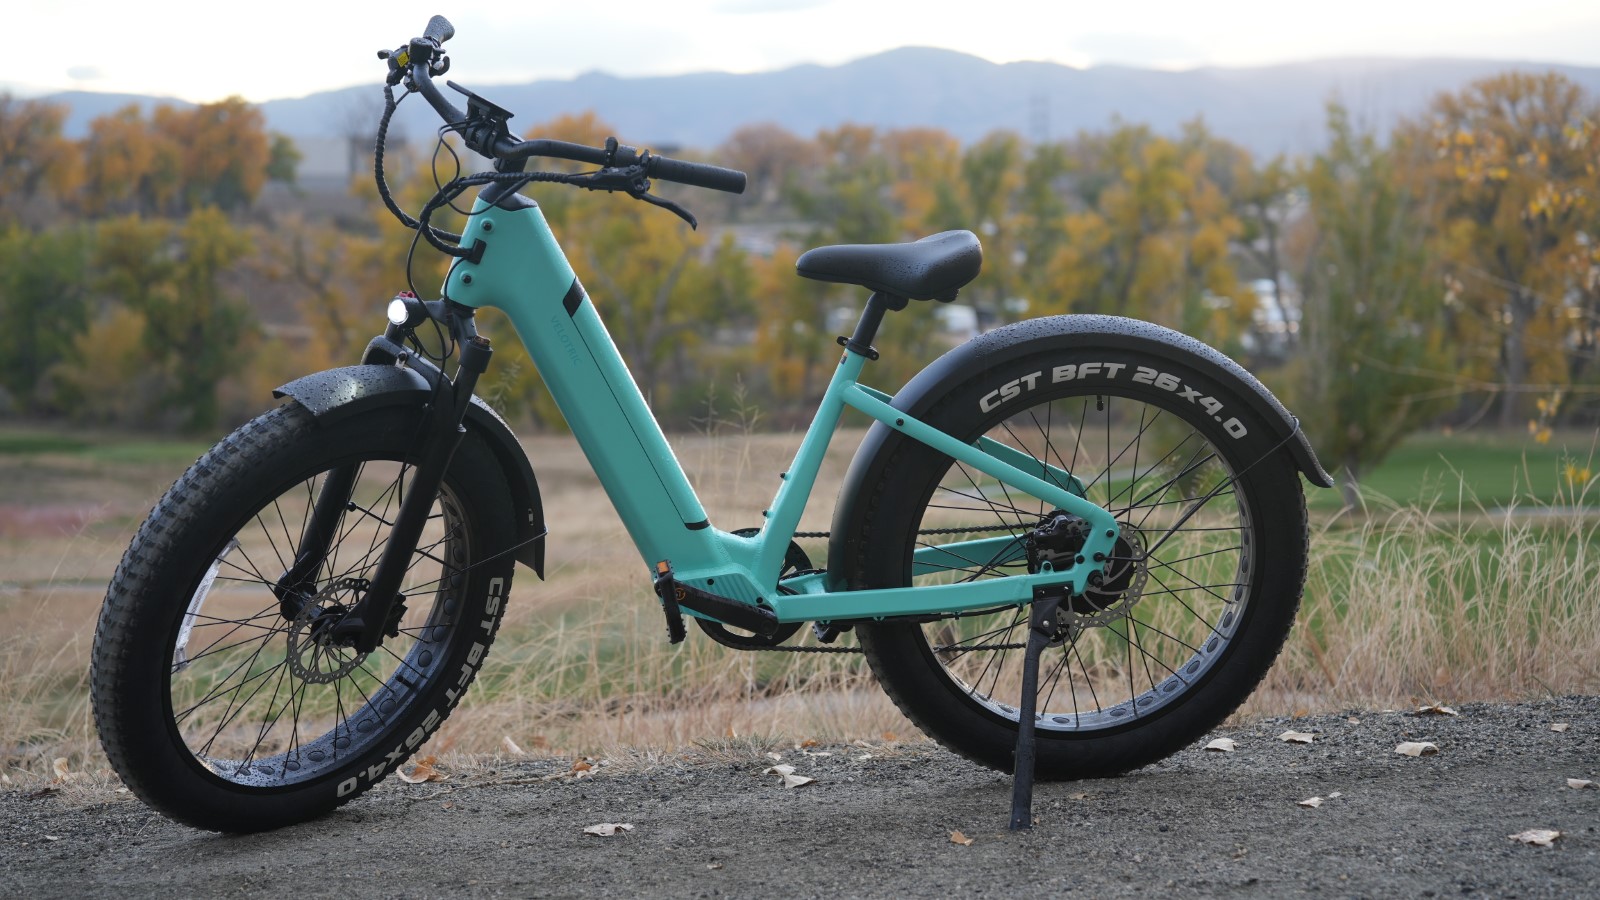 Velotric Nomad 1 electric bike review: Tackle any terrain in comfort